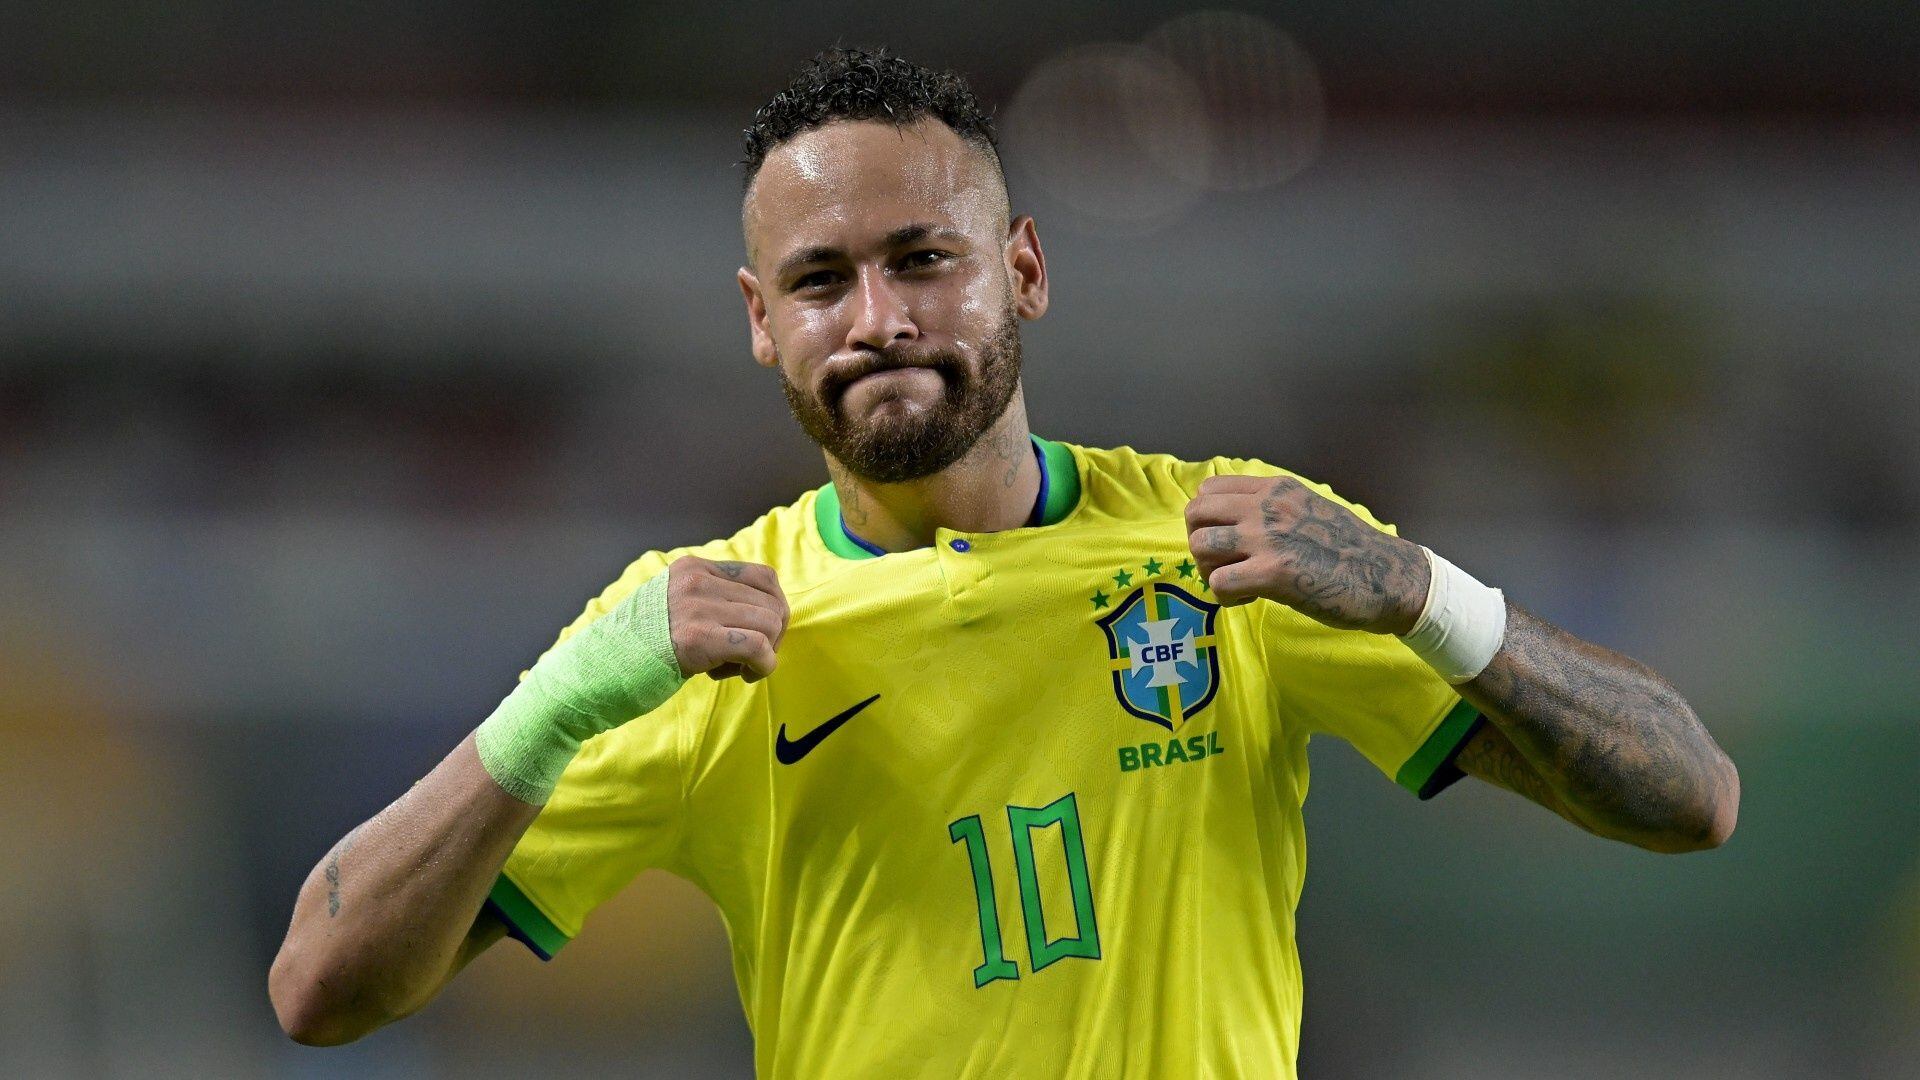 A constant topic of conversation, Brazil's new coach considers Neymar